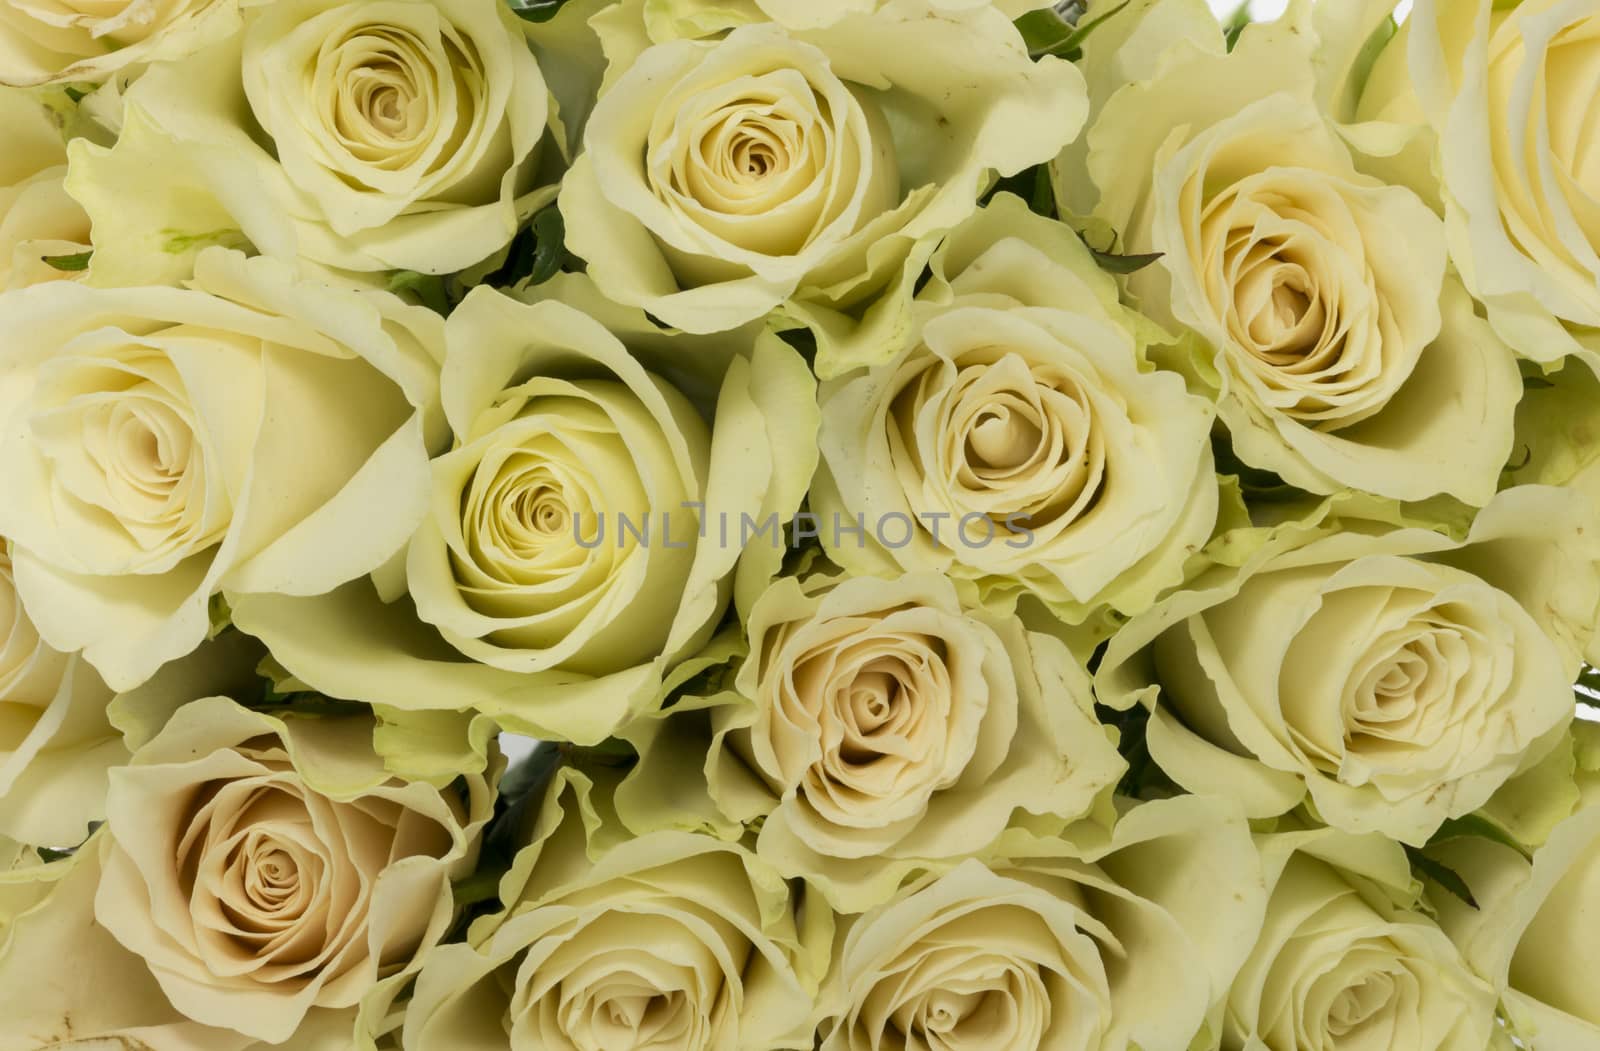 bouquet of white roses as wallpaper background